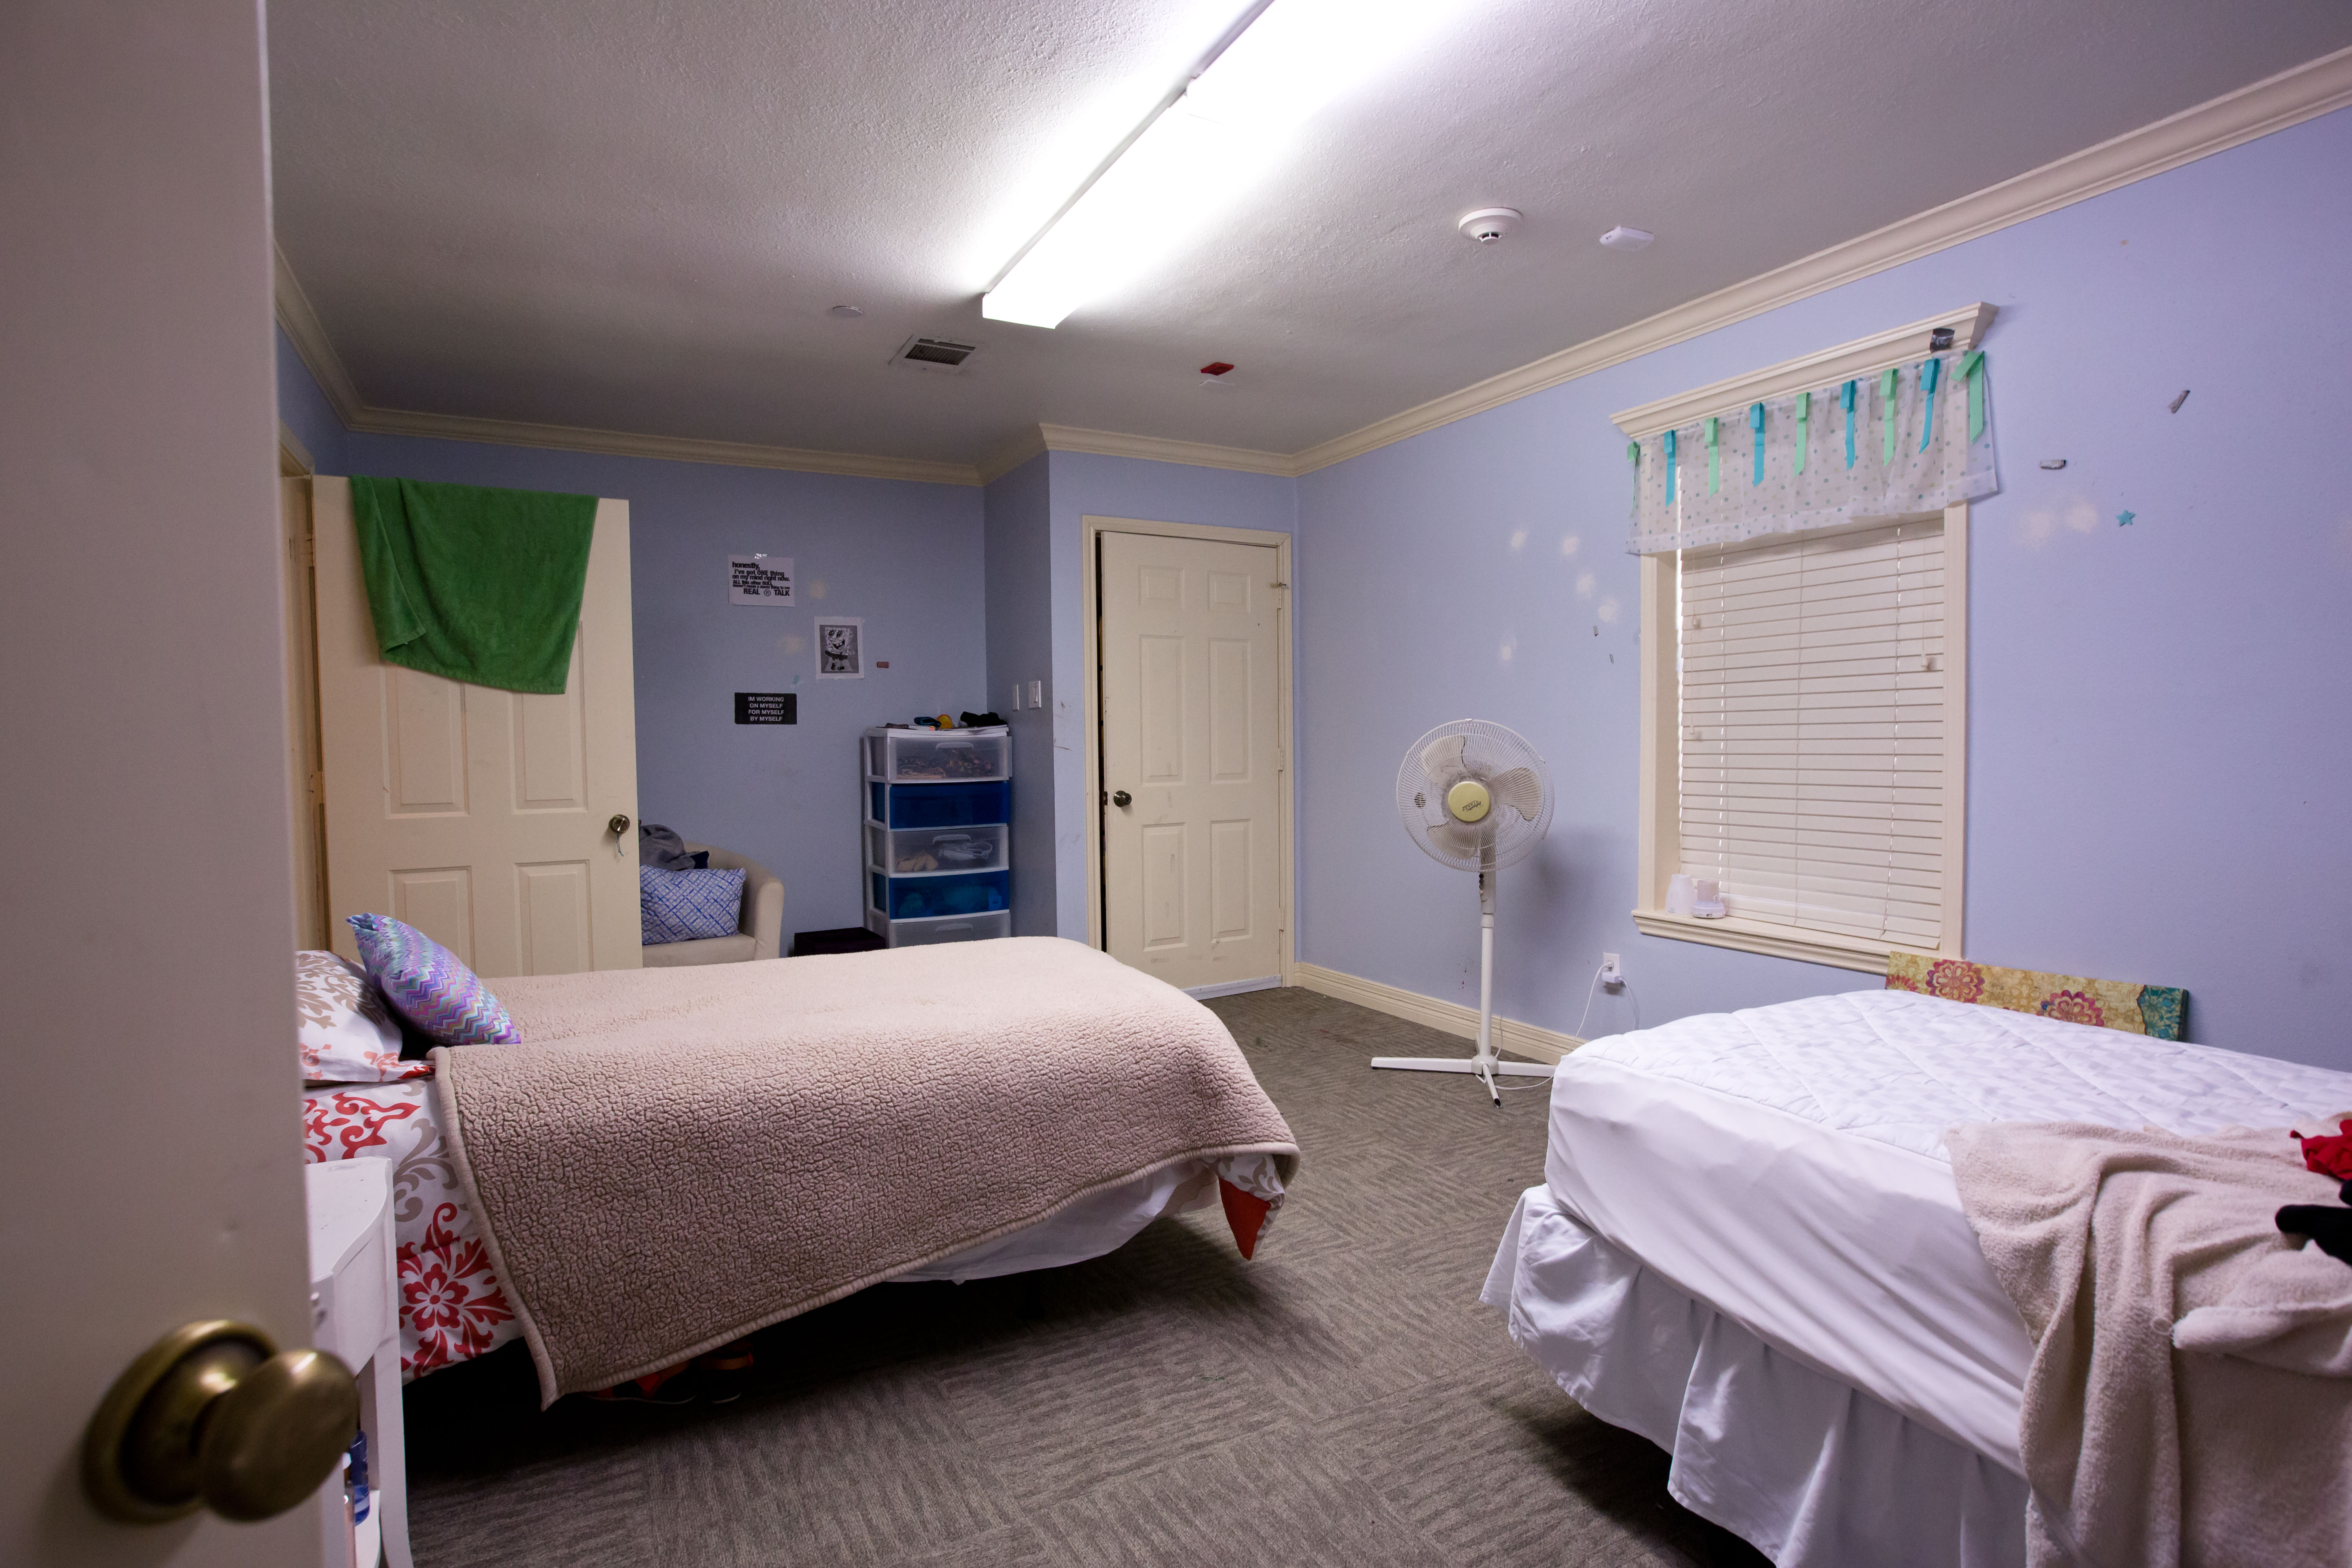 Freedom Place is the only facility in Texas licensed to treat child sex-trafficking victims. It cares for up to 20 girls, who usually stay from nine to 12 months at a time.